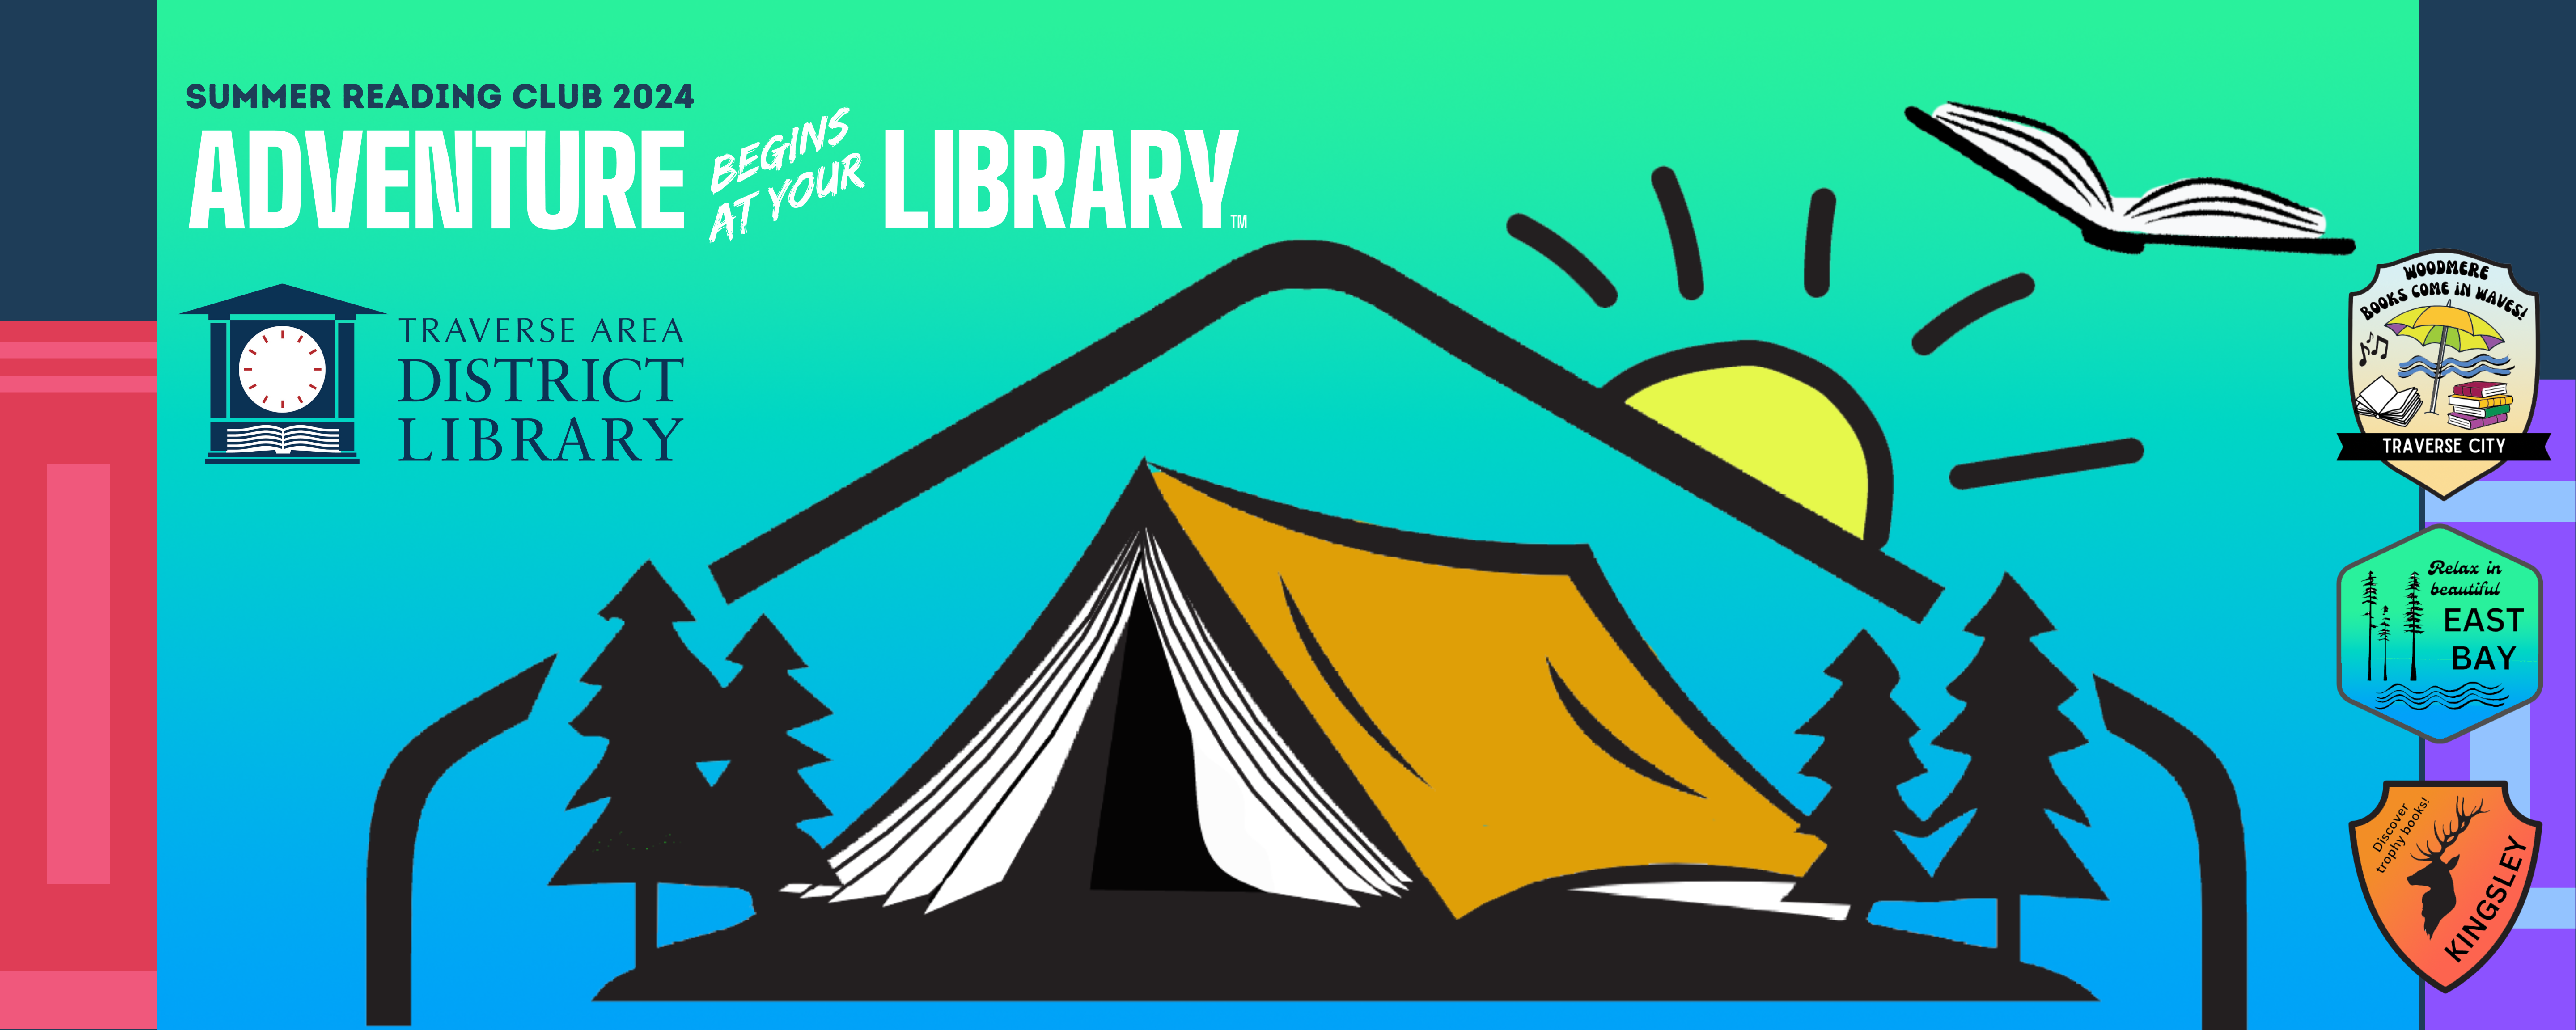 Summer reading club logo with a book that's also a tent - all other info repeated on page